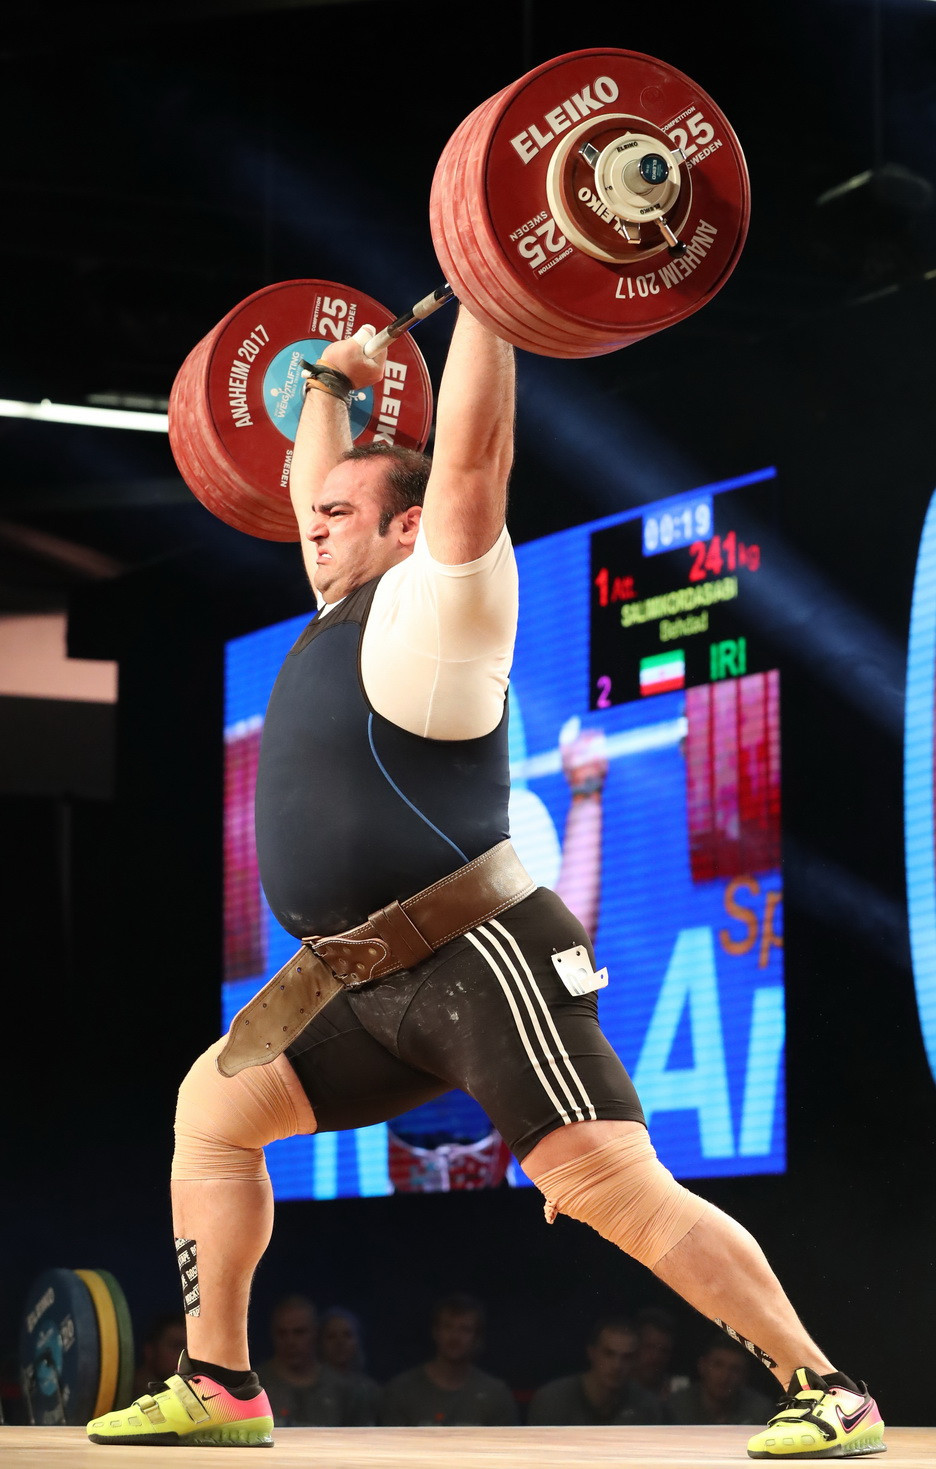 Compatriot Behdad Salimikordasiabi rounded out the overall podium ©IWF